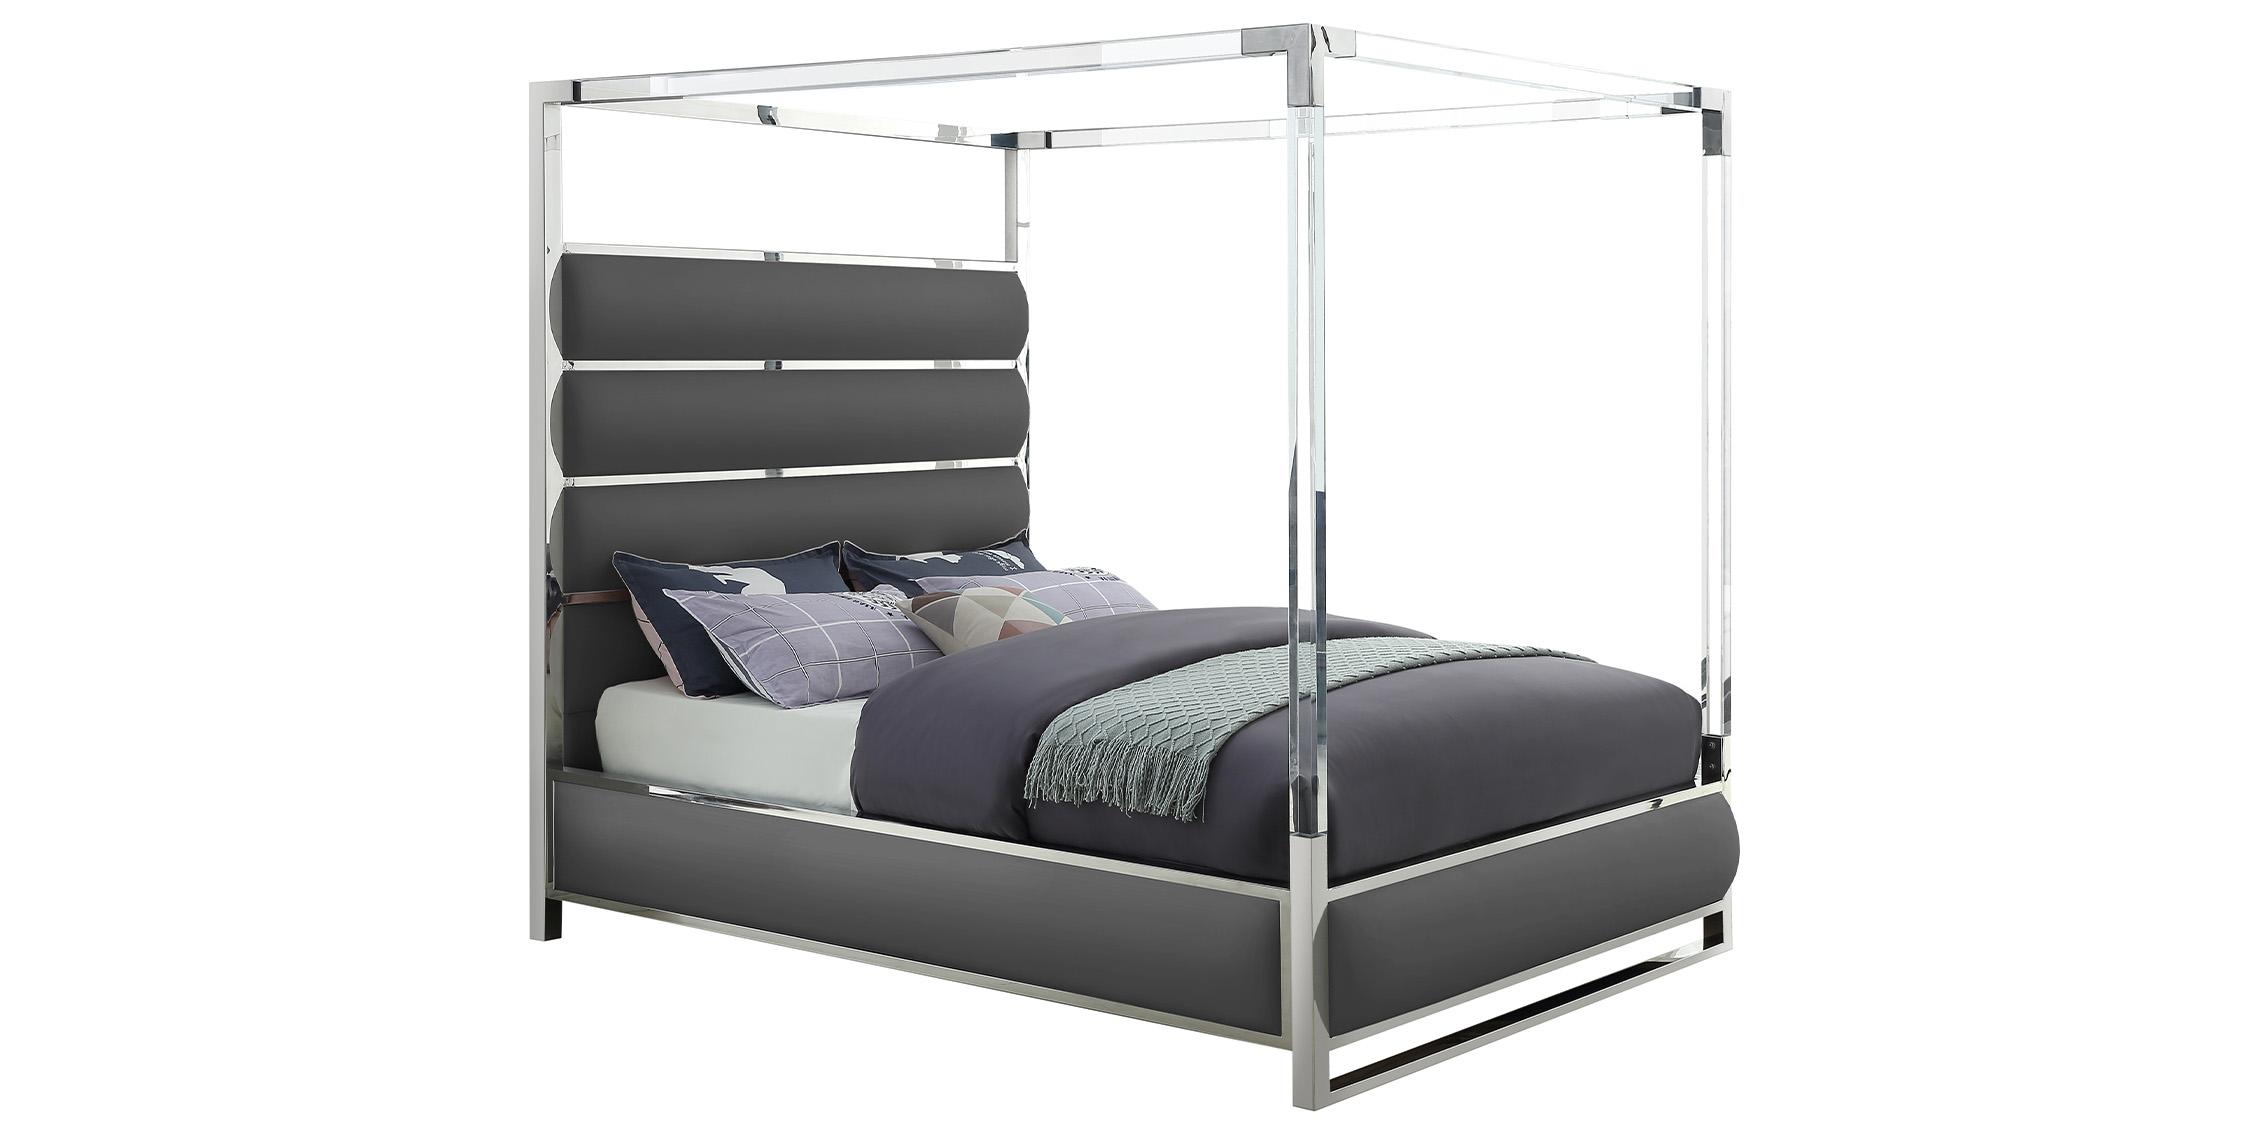 

    
Glam Grey Faux Leather & Chrome Canopy King Bed ENCORE Meridian Modern
